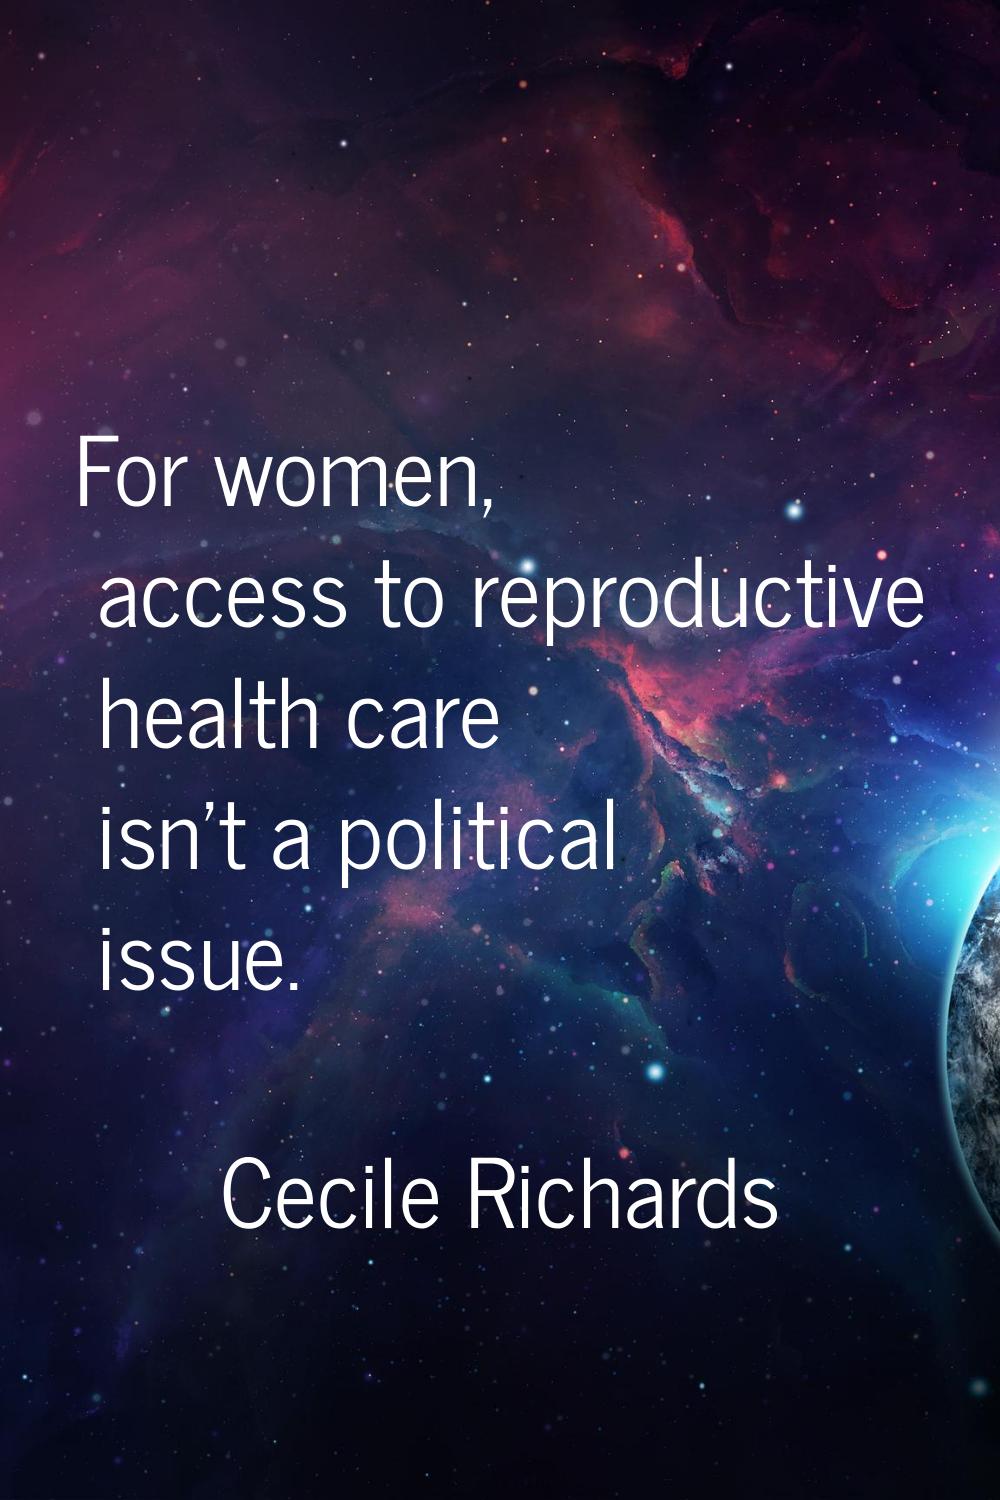 For women, access to reproductive health care isn't a political issue.